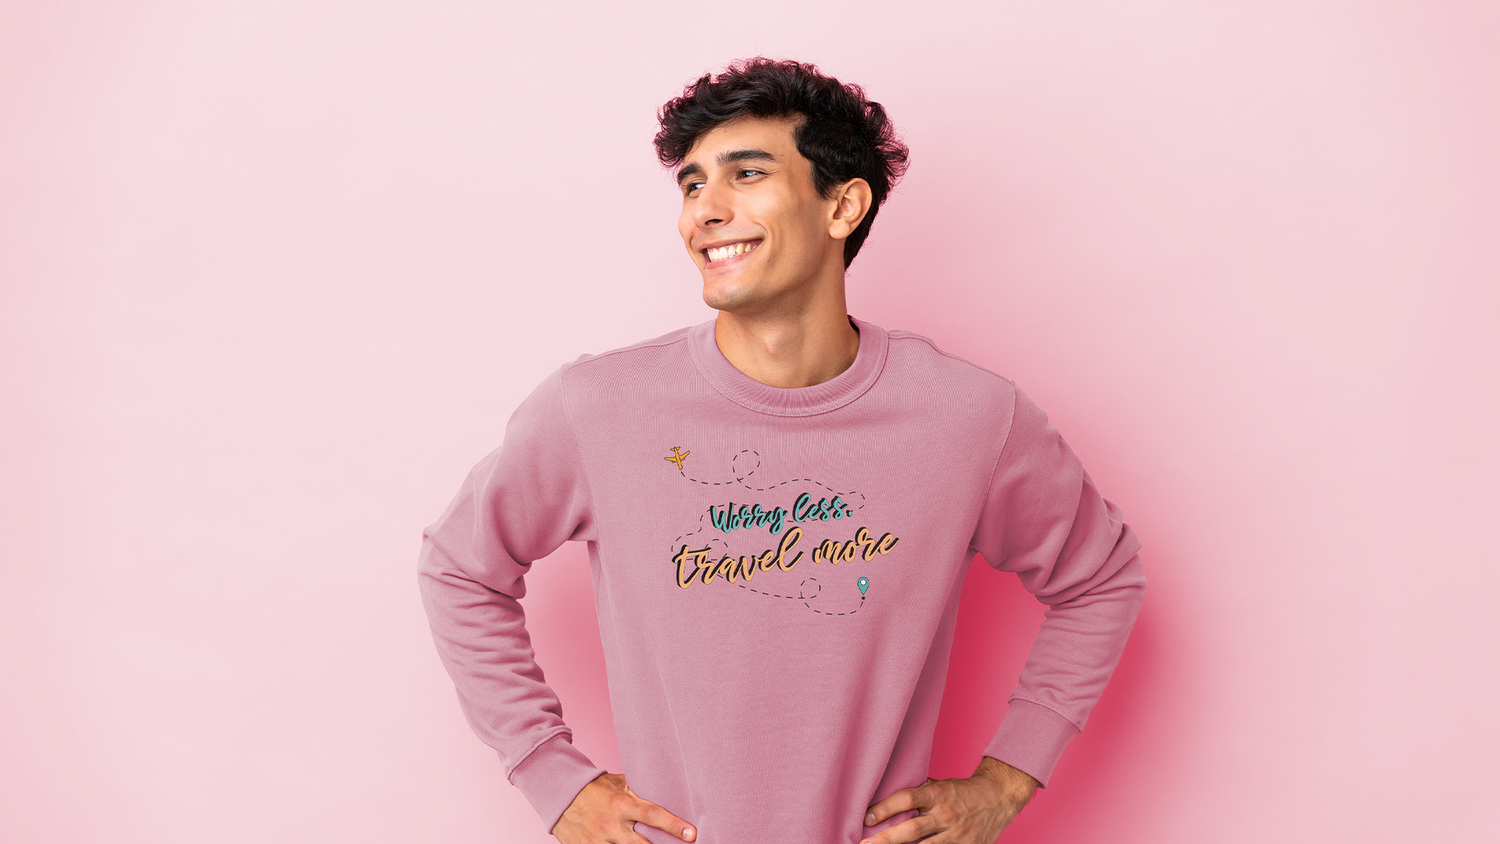 Print and personalize sweaters